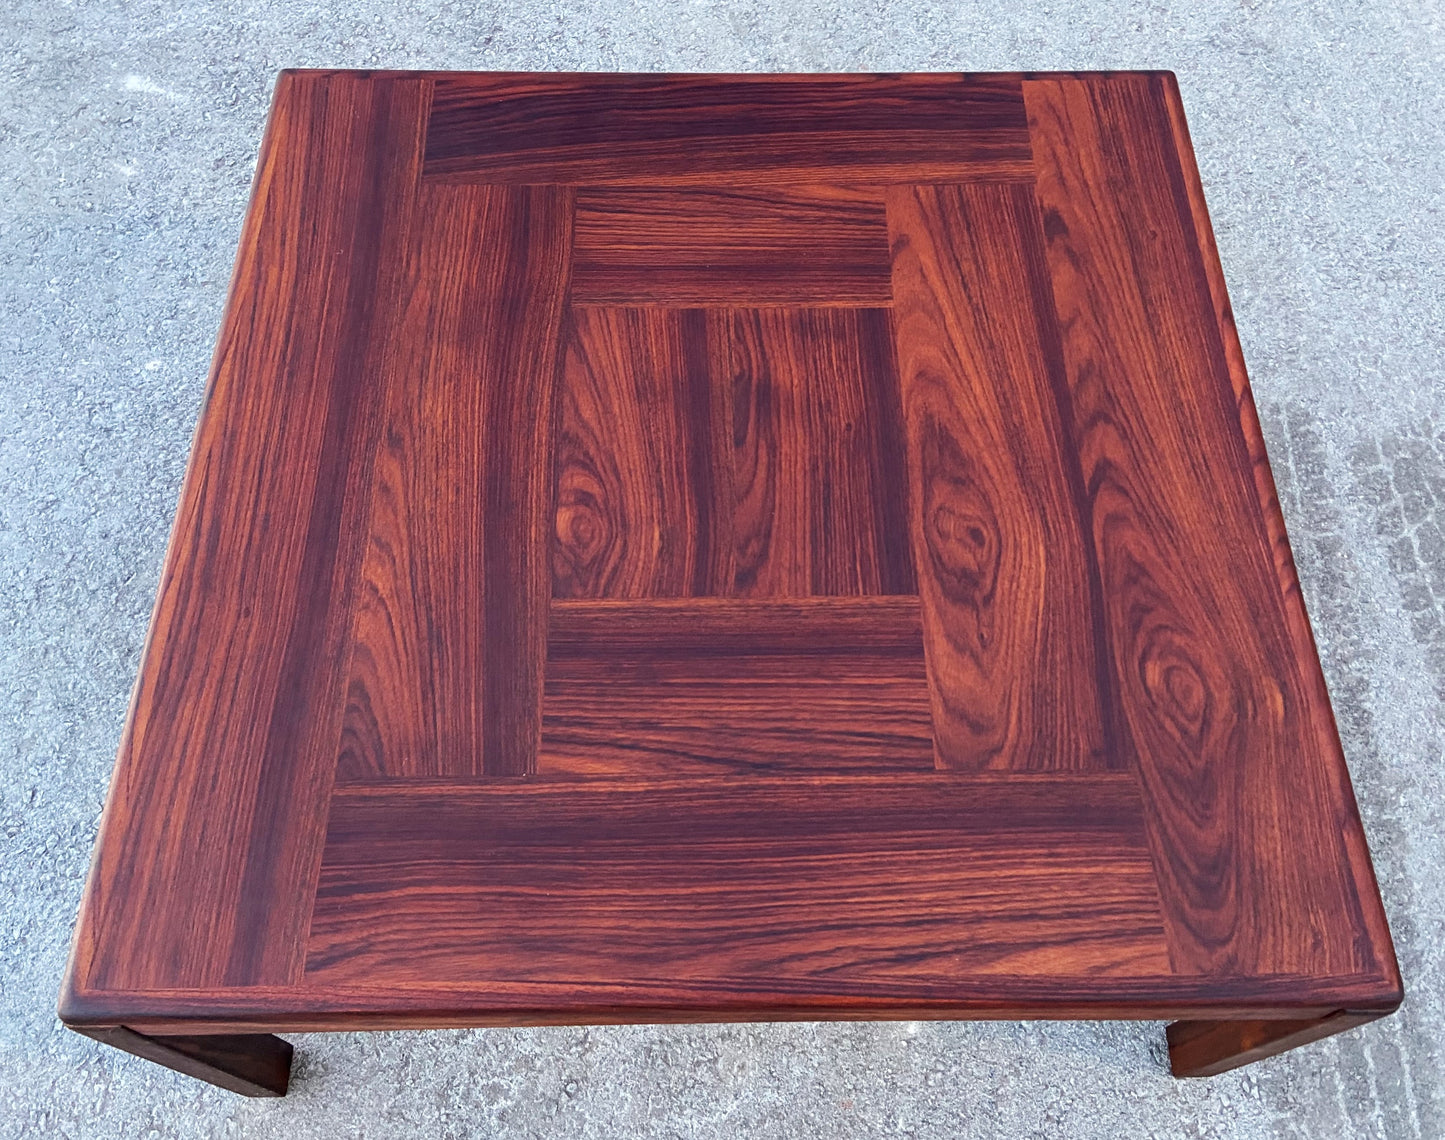 REFINISHED Danish MCM Rosewood Coffee Table, PERFECT